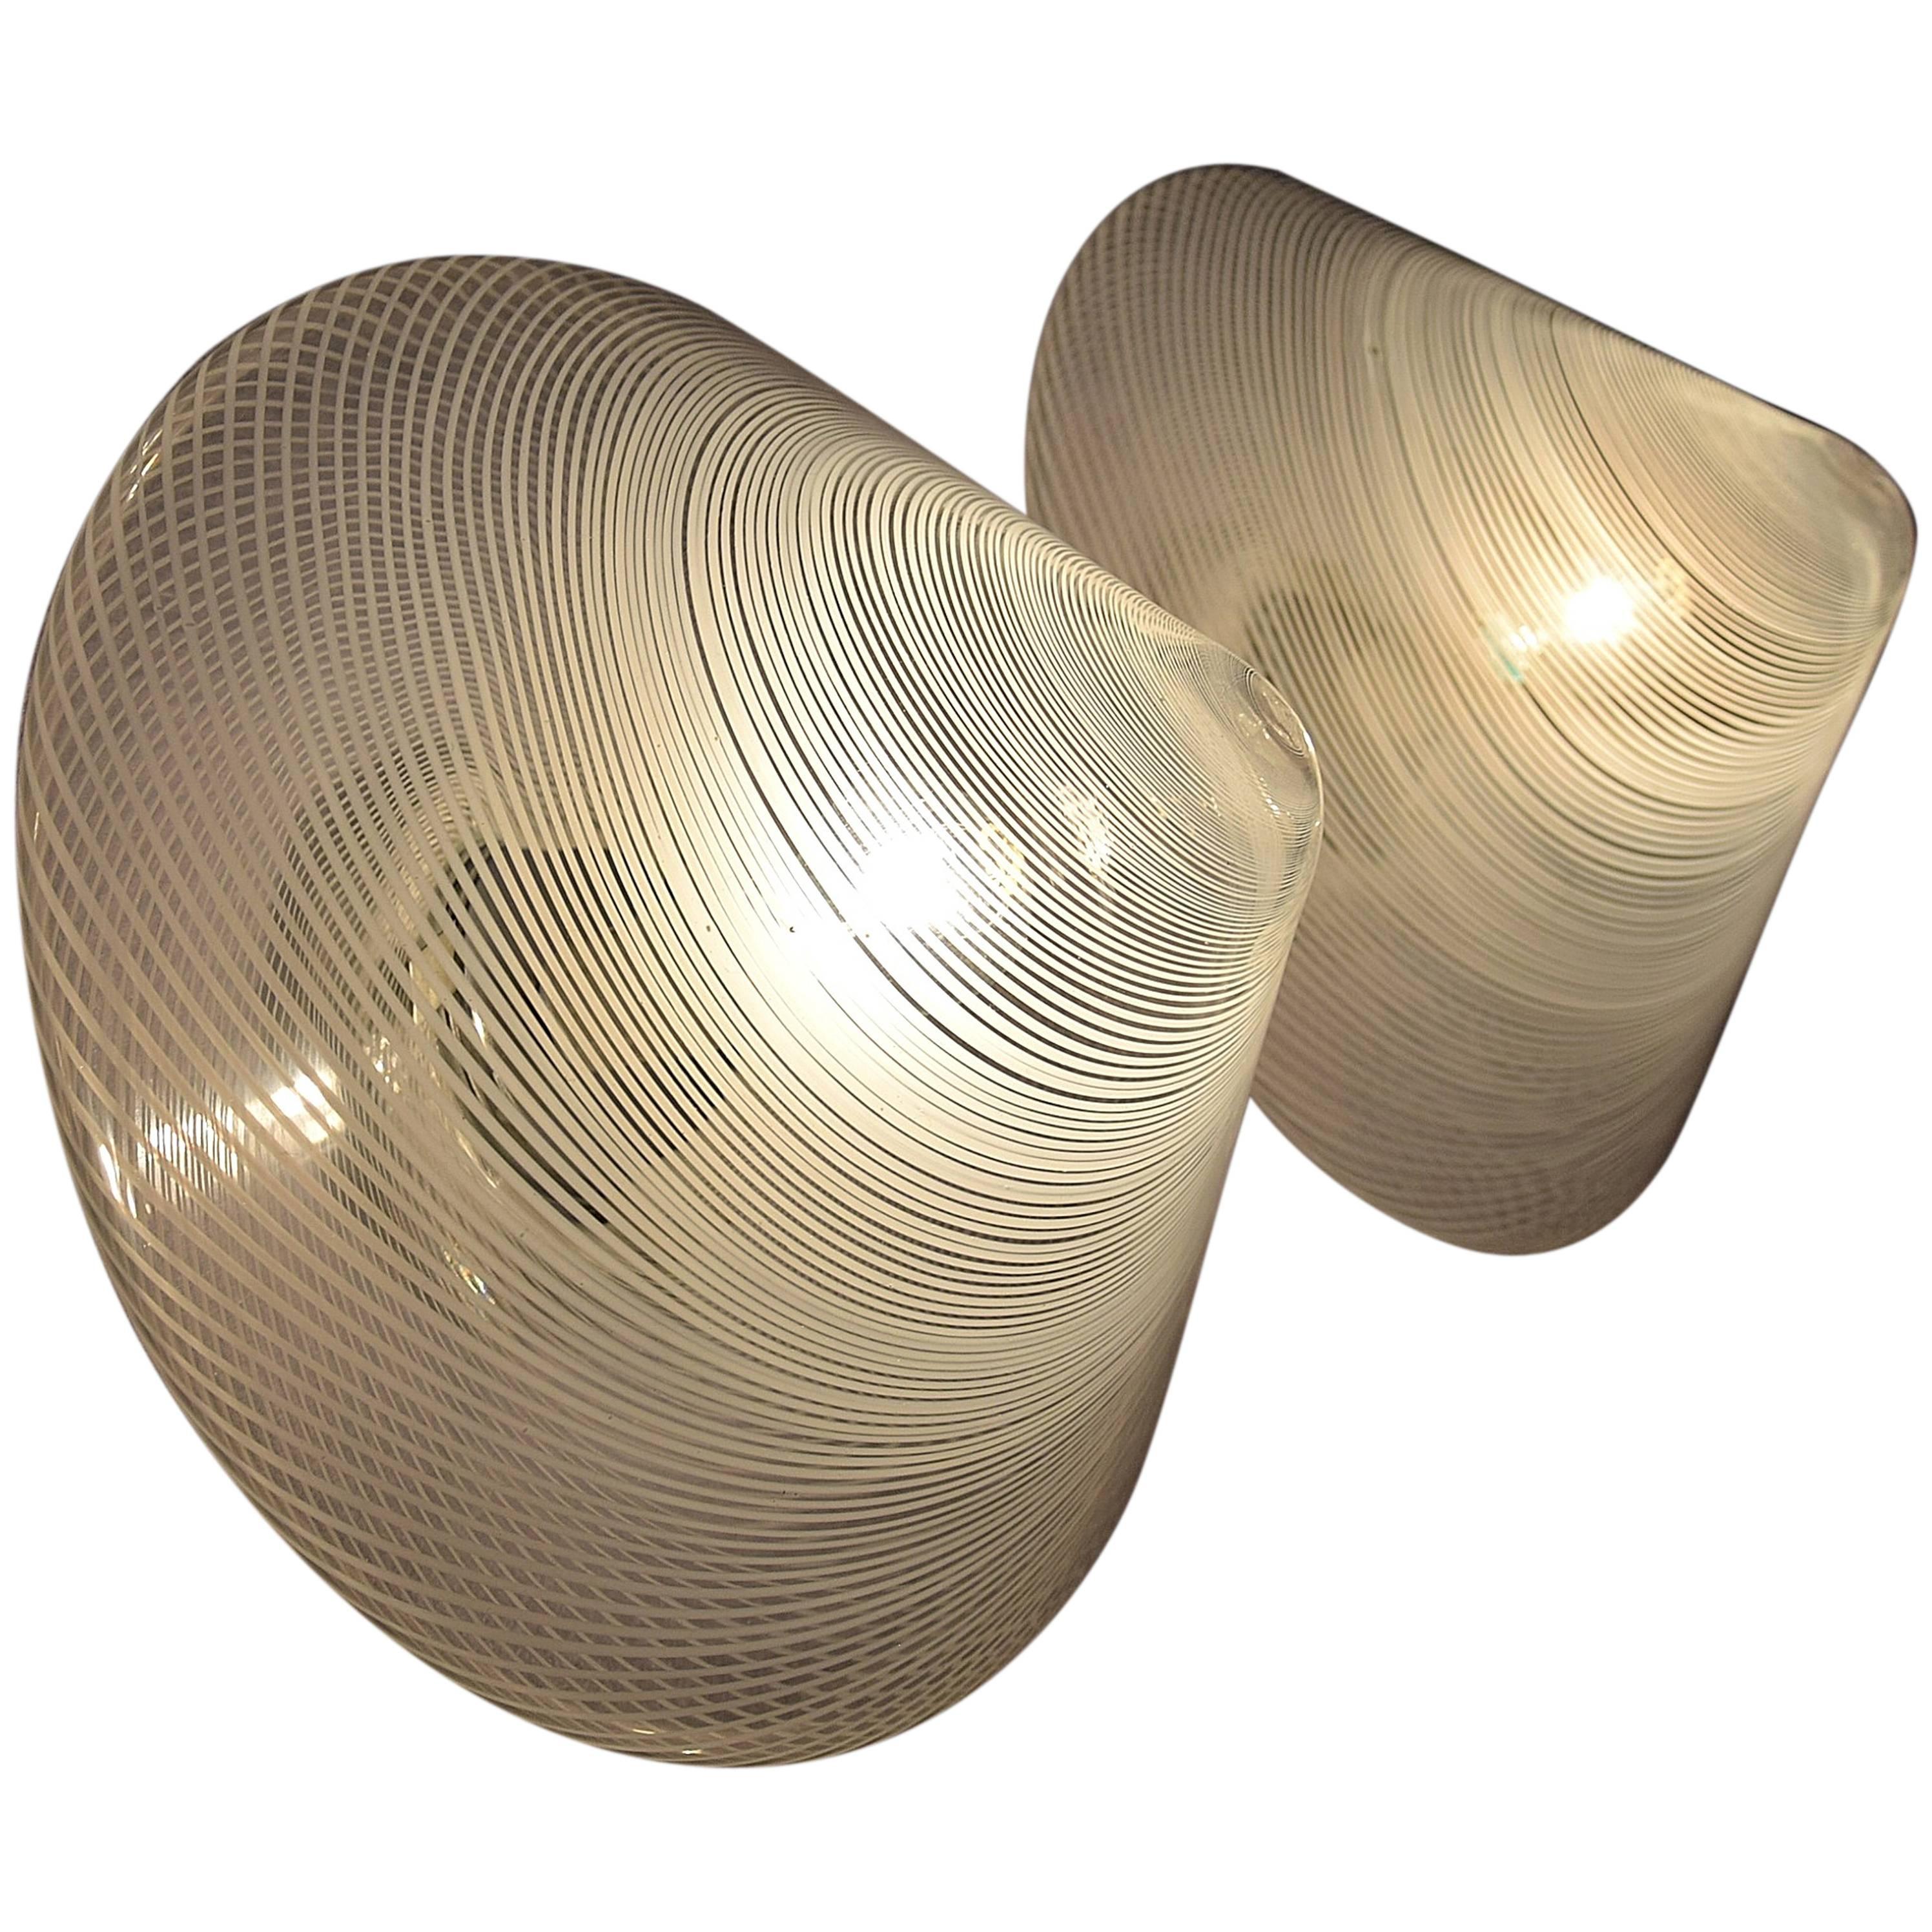 Handblown Mid century Modern Wall or Ceiling Reticello Lights Venini Style For Sale